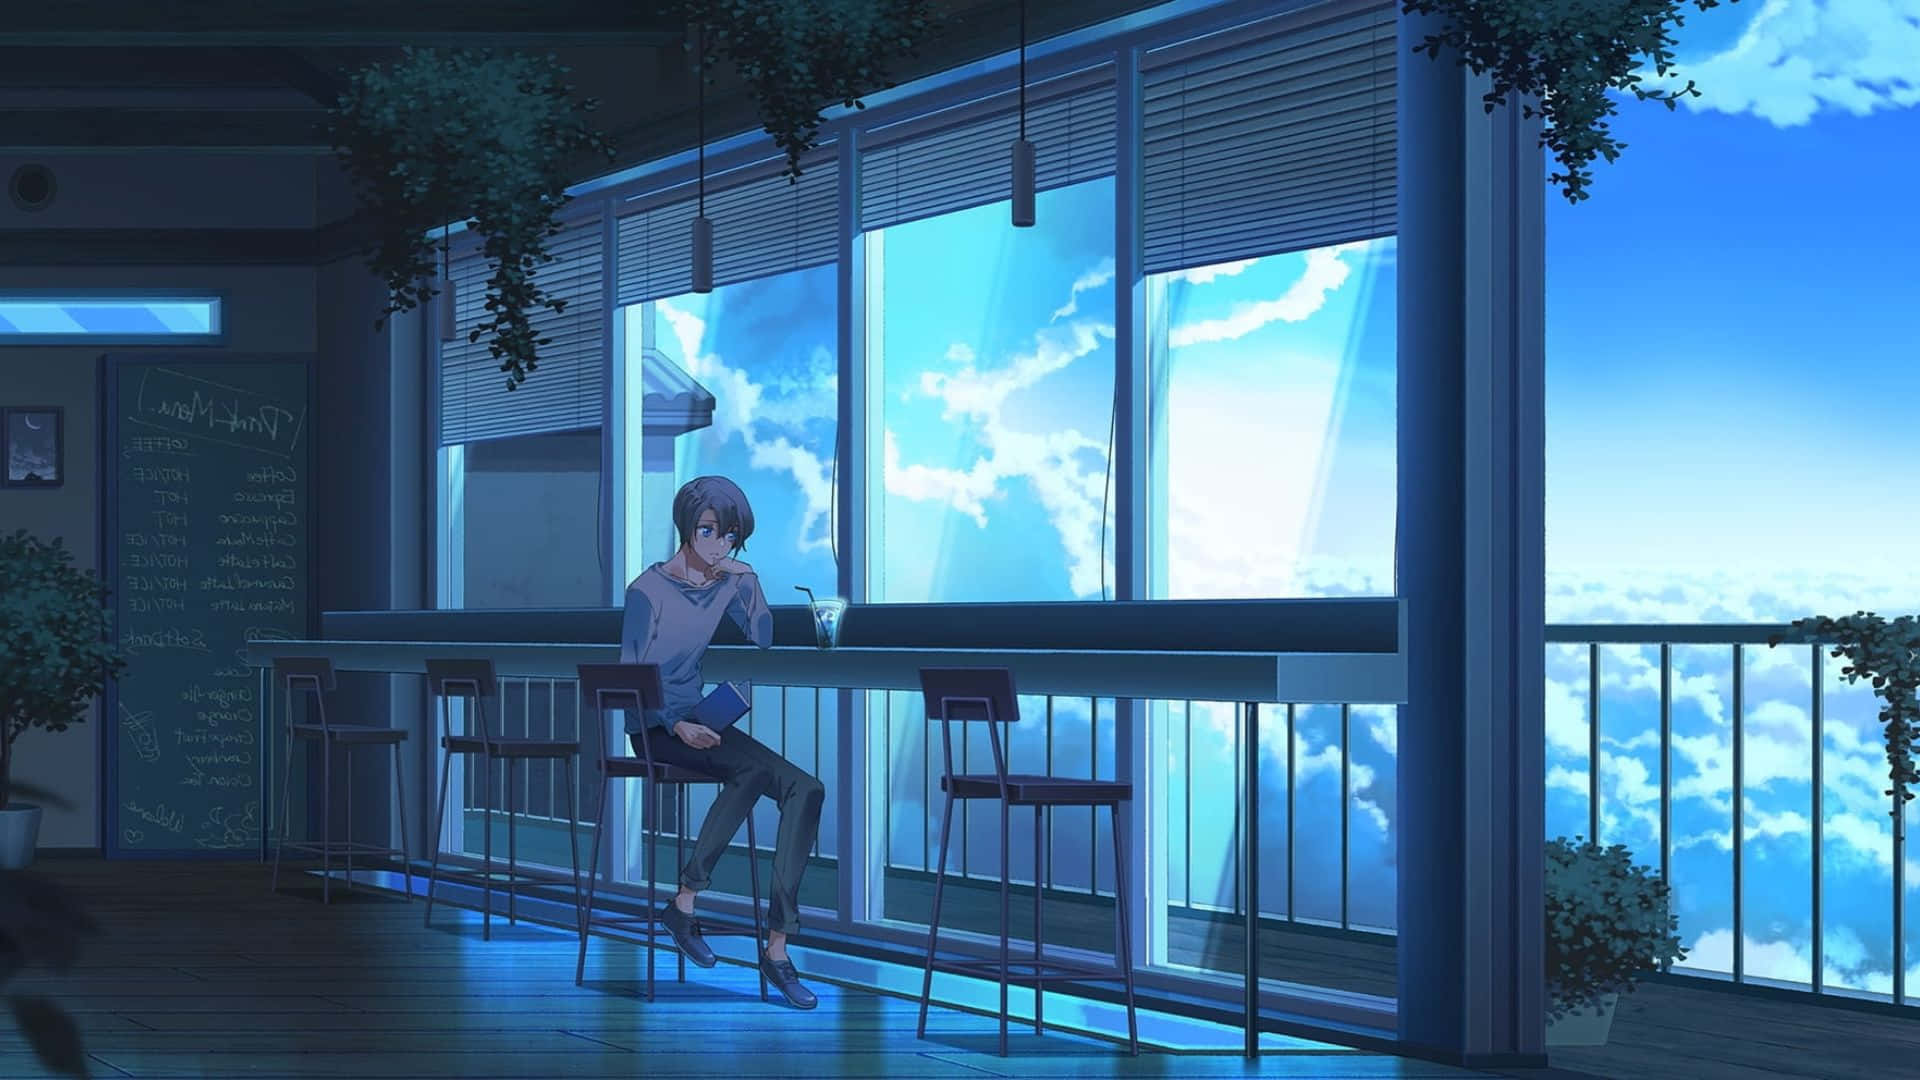 Enjoy a Hot Cup of Coffee in a Cozy Anime Cafe